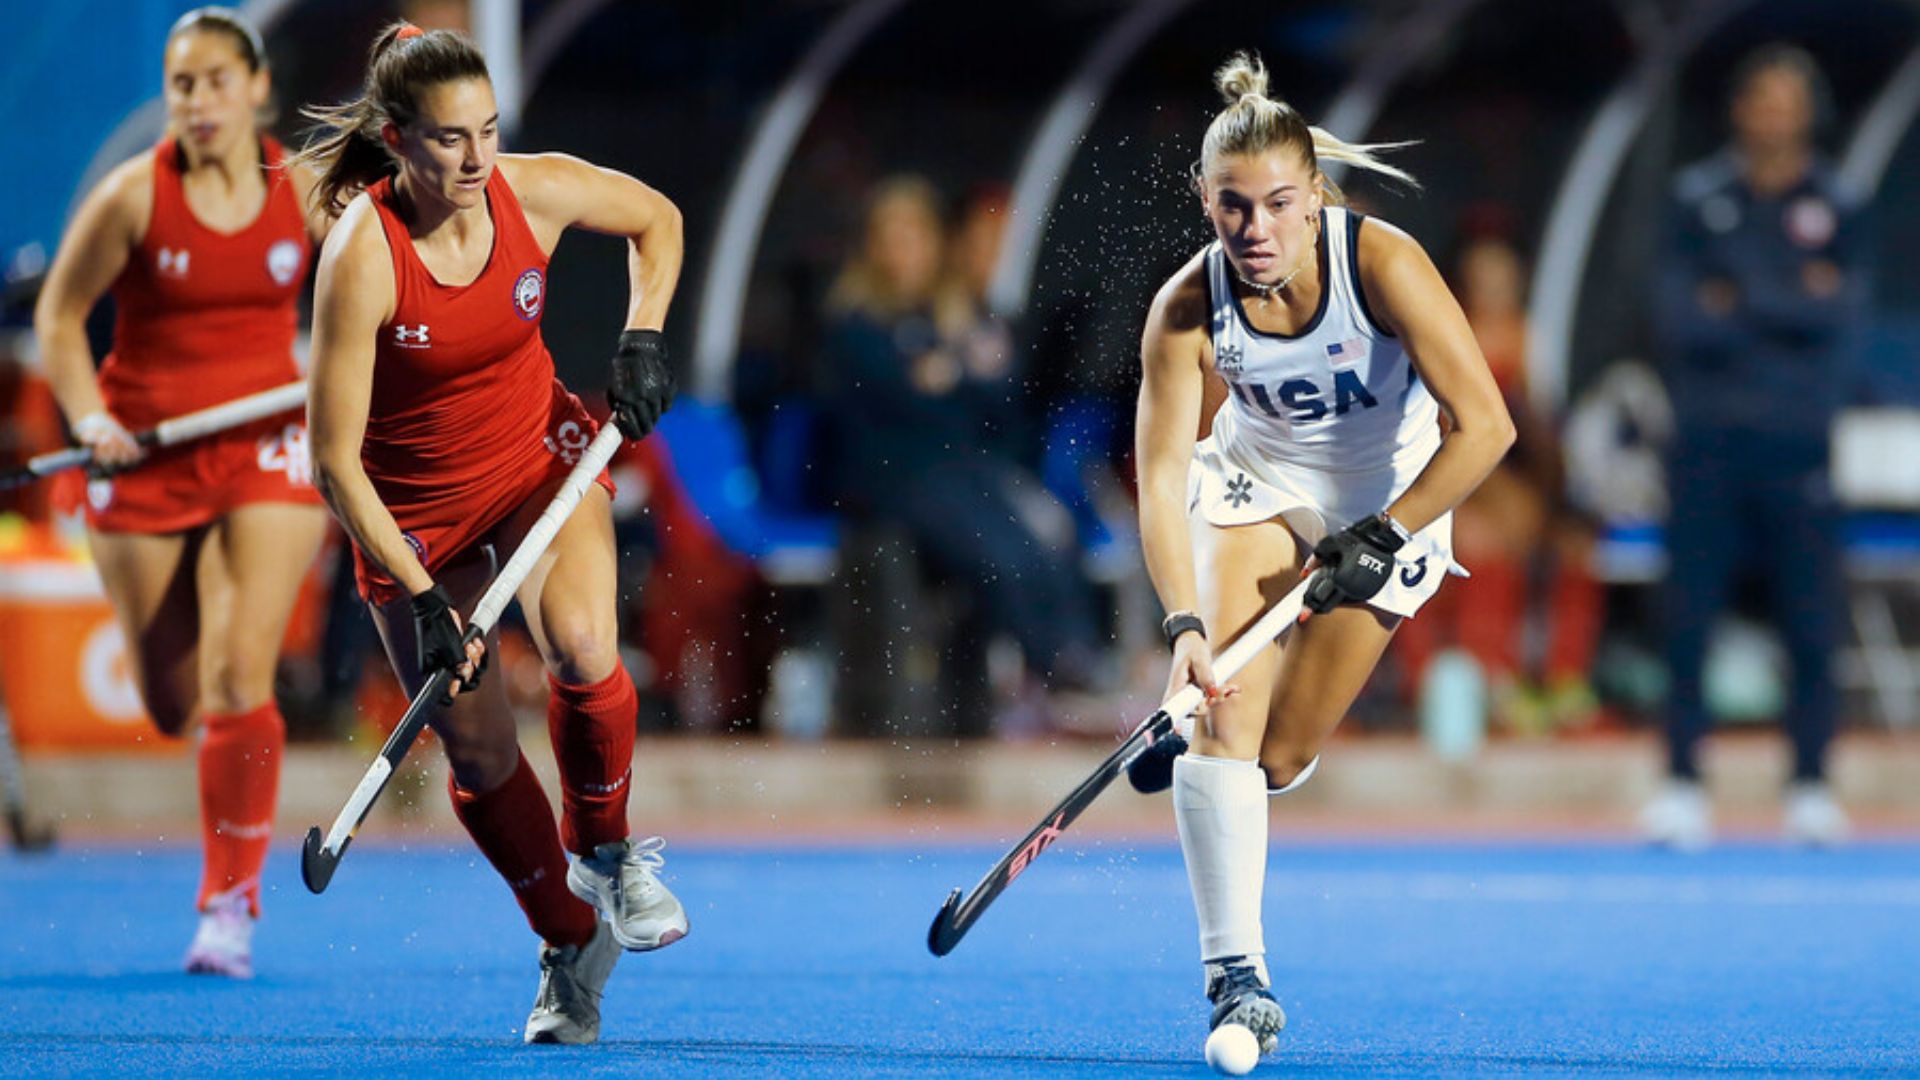 The US to play in the female's field hockey final after defeating Chile